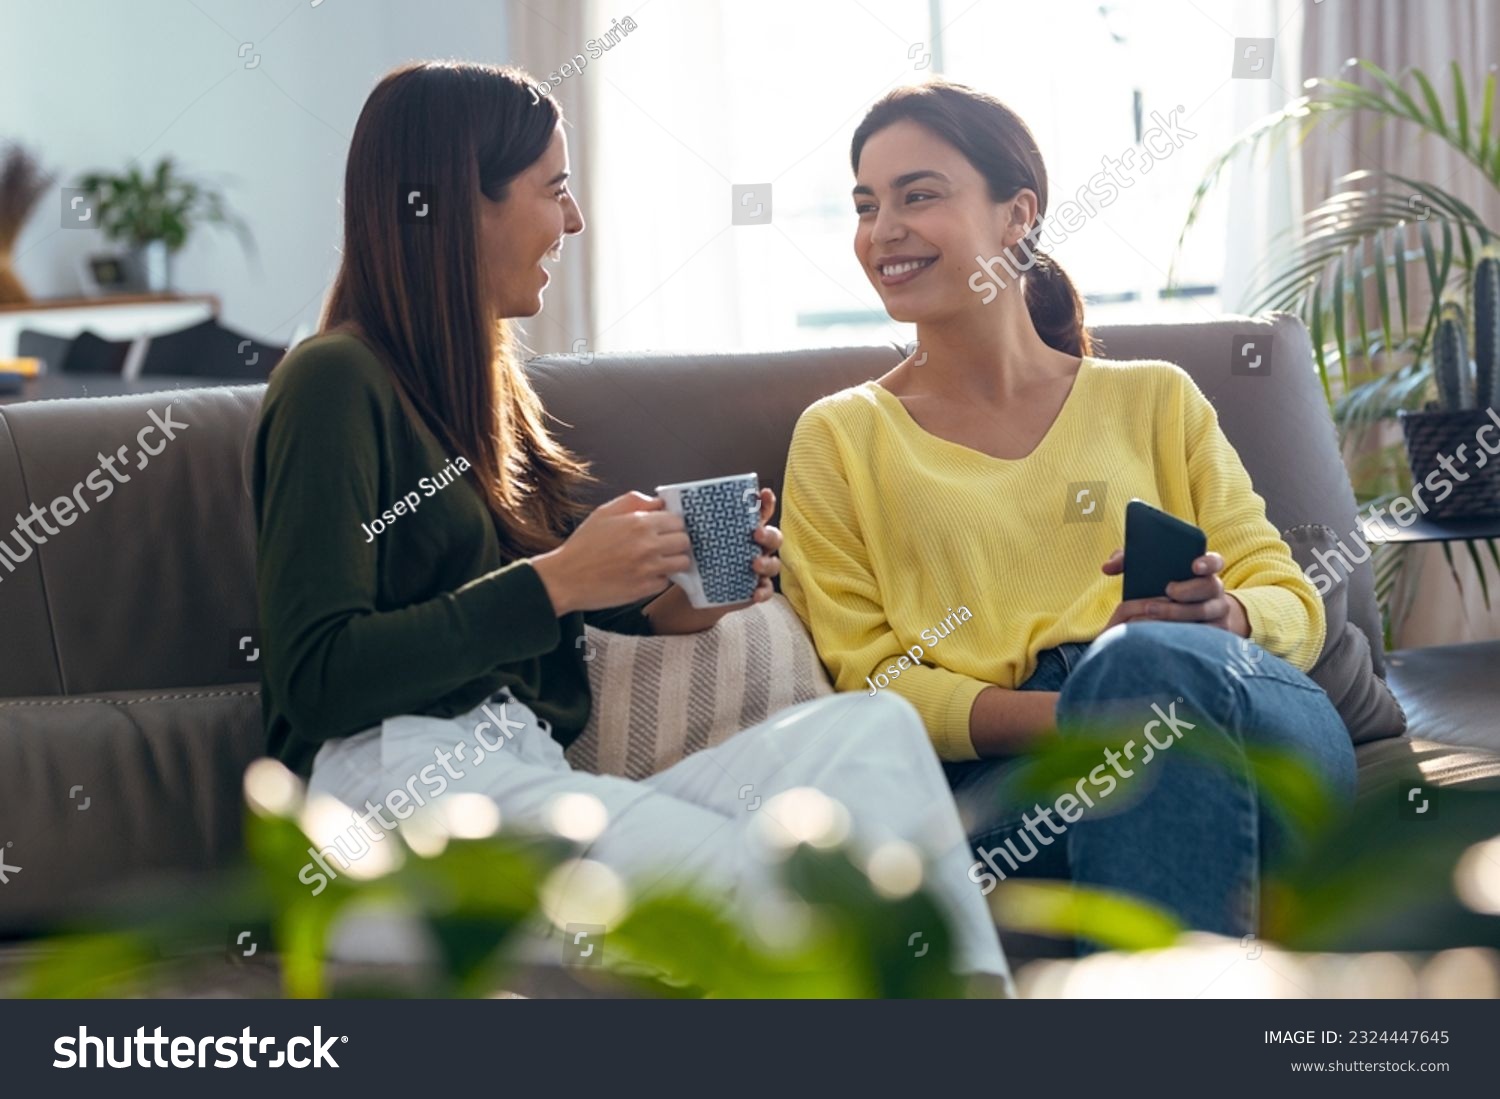 Shot of two smiling young women talking while drinking coffee sitting on couch in the living room at home. #2324447645